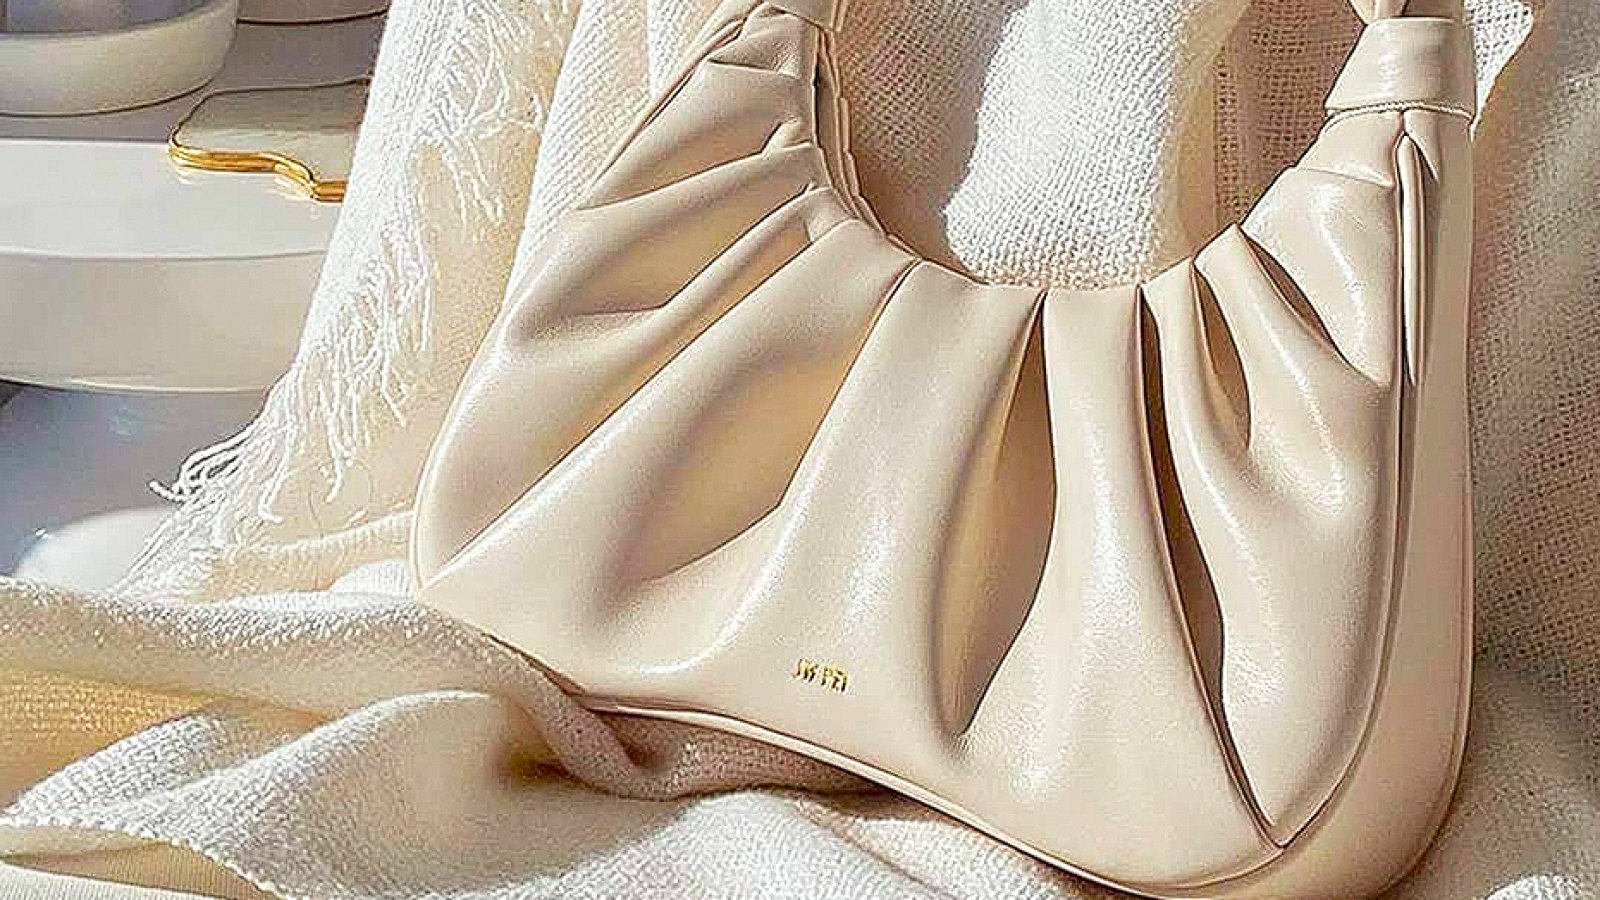 The Puffy Pillow Bag Trend Is Still Happening in 2021